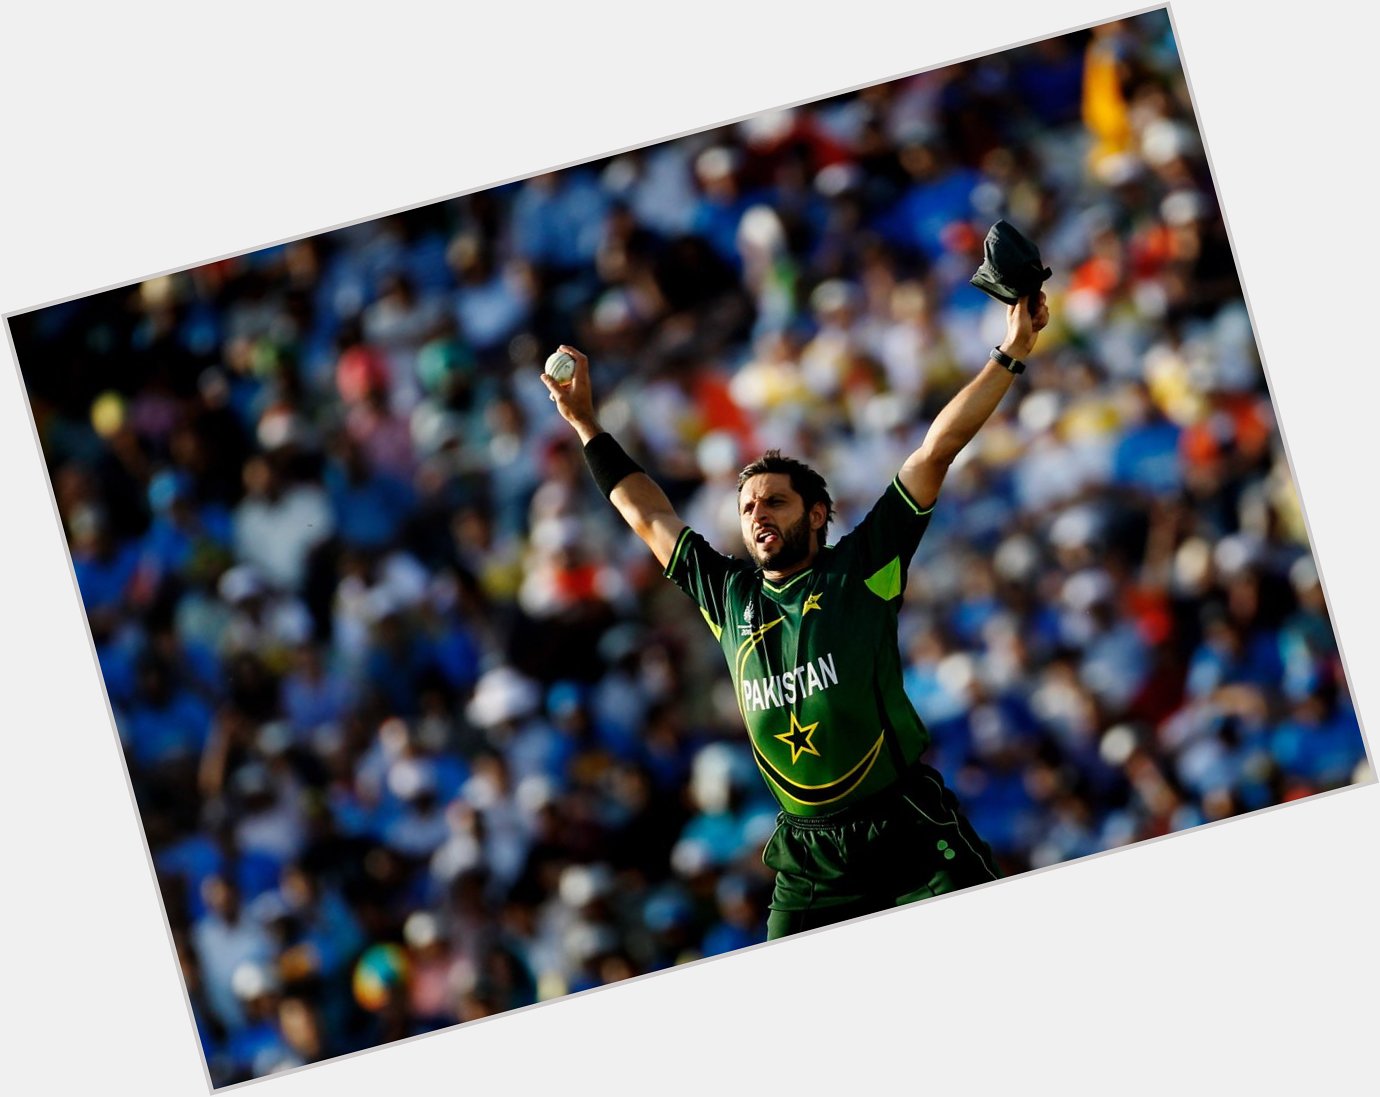 He holds the records for the most 6s in ODIs & most wkts in T20Is - Happy Birthday to Pakistan\s Shahid Afridi.
